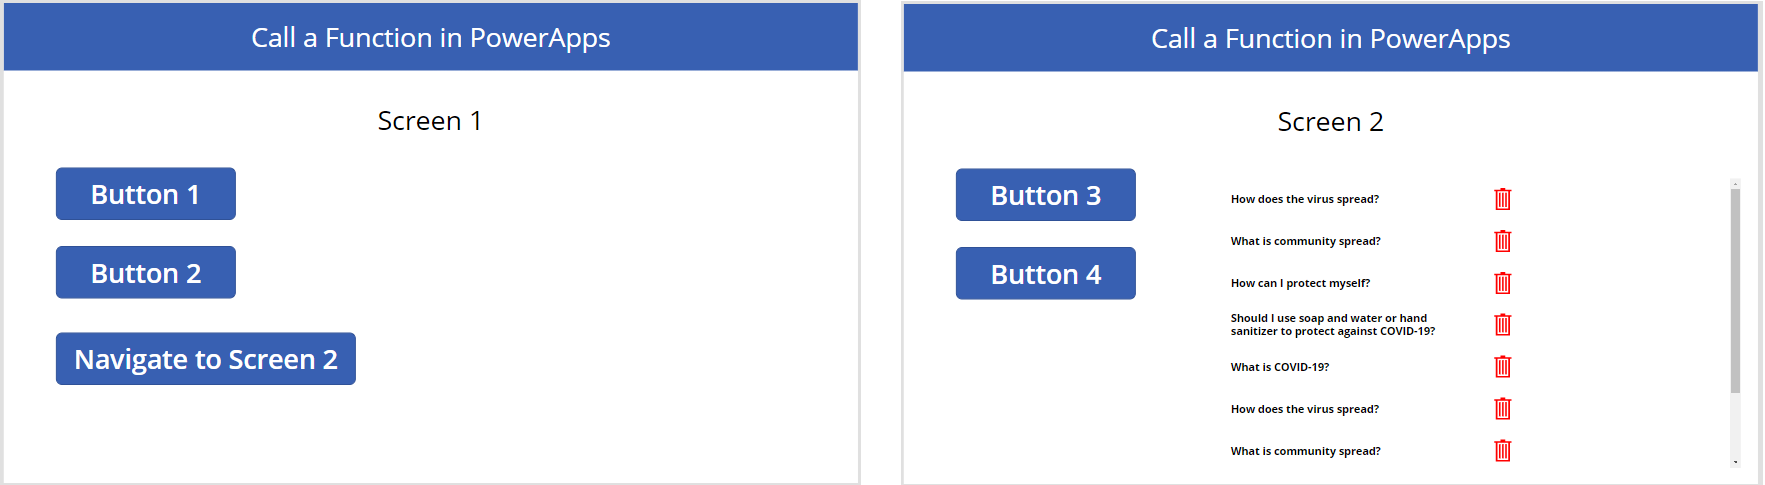 Screens in powerapps